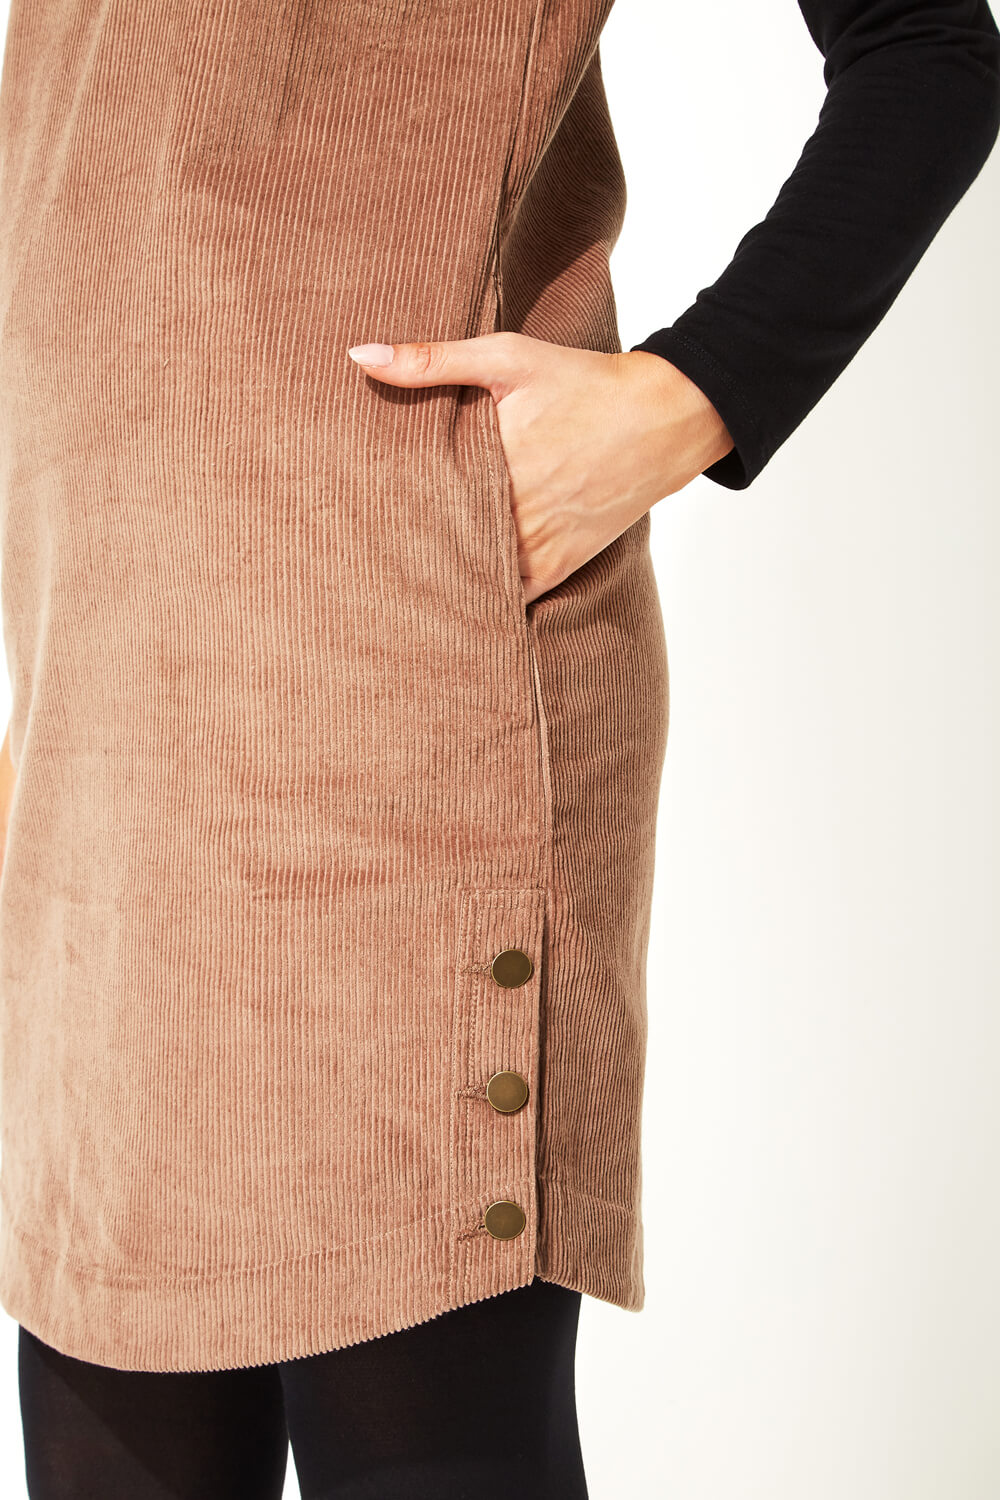 Camel  Corduroy Button Pinafore Dress, Image 4 of 5